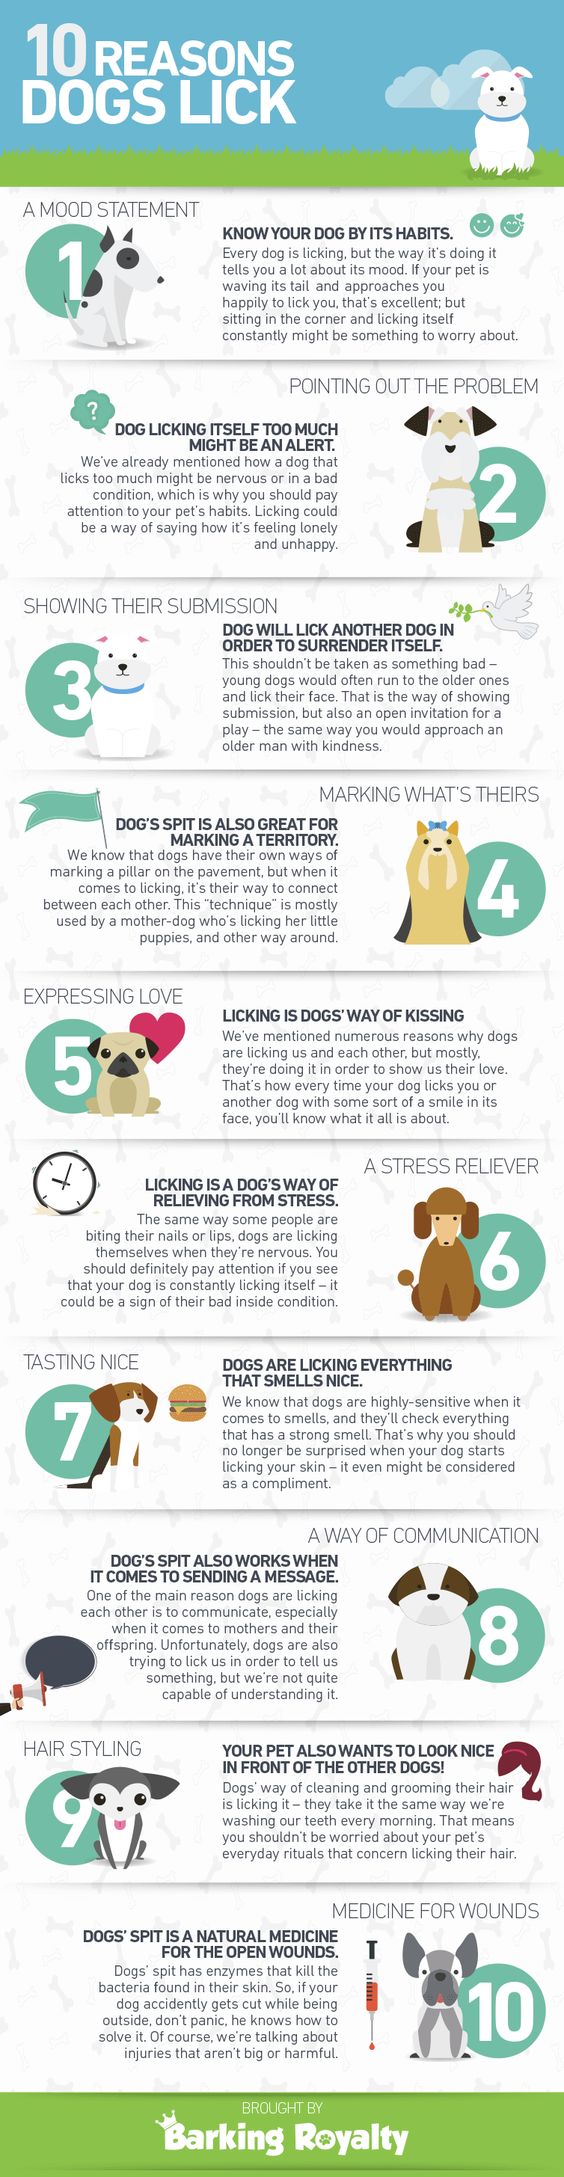 10 Reasons Why Dogs Lick Infographic